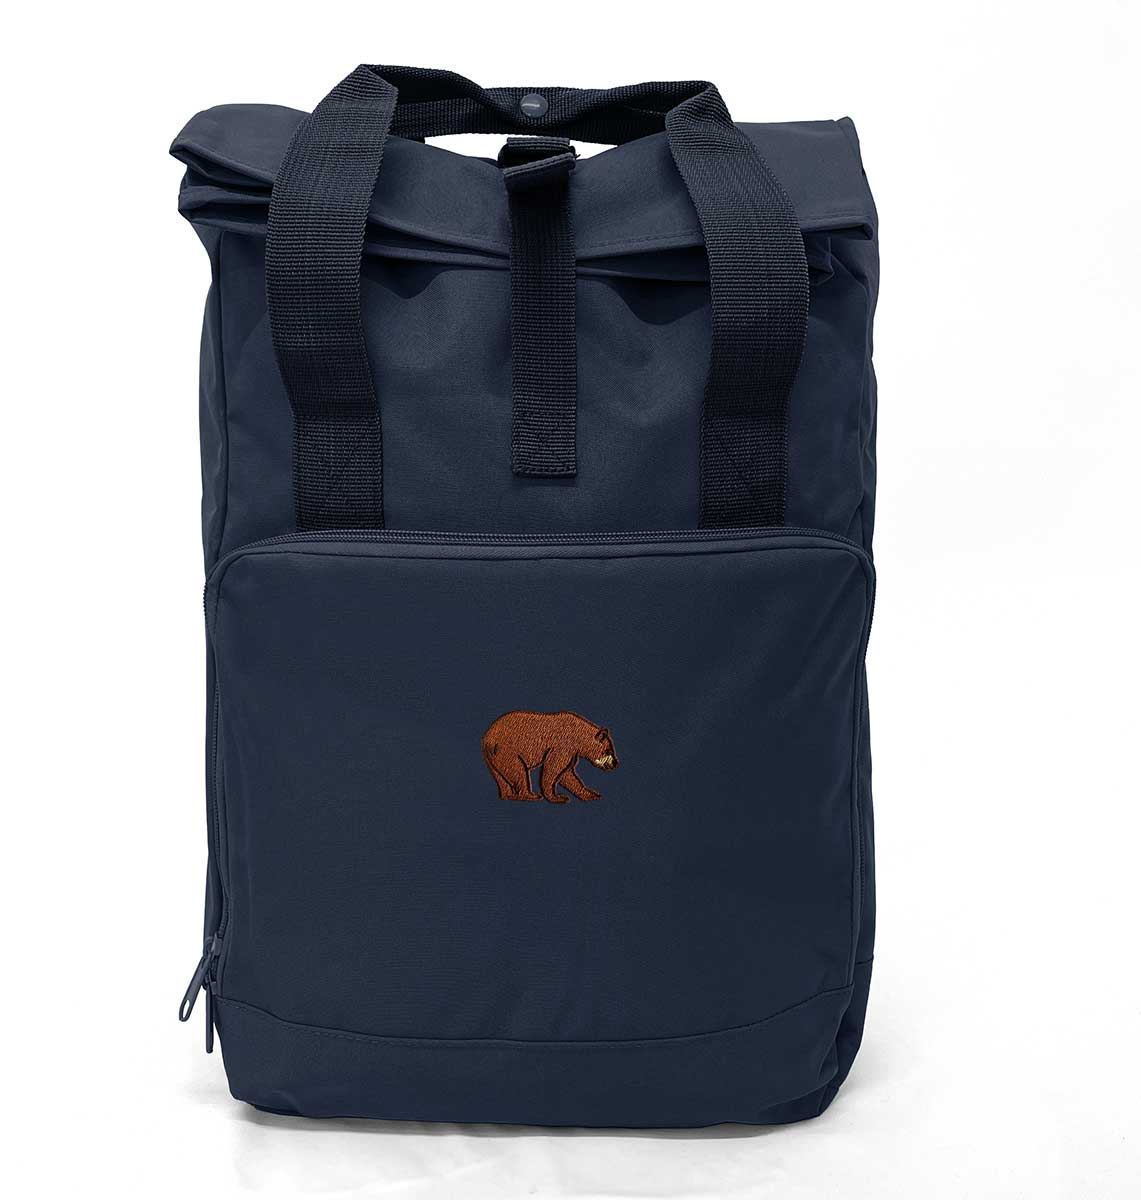 Bear Large Roll-top Laptop Recycled Backpack - Blue Panda